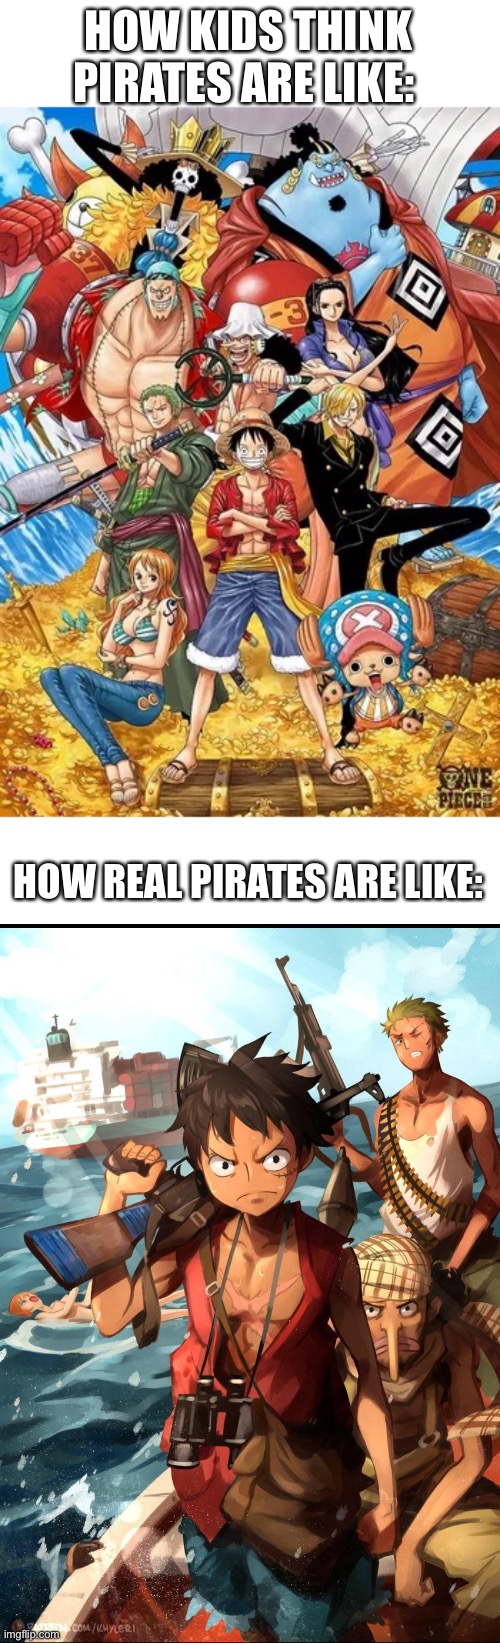 Reminds me of my Somalian friends | HOW KIDS THINK PIRATES ARE LIKE:; HOW REAL PIRATES ARE LIKE: | image tagged in funny memes | made w/ Imgflip meme maker